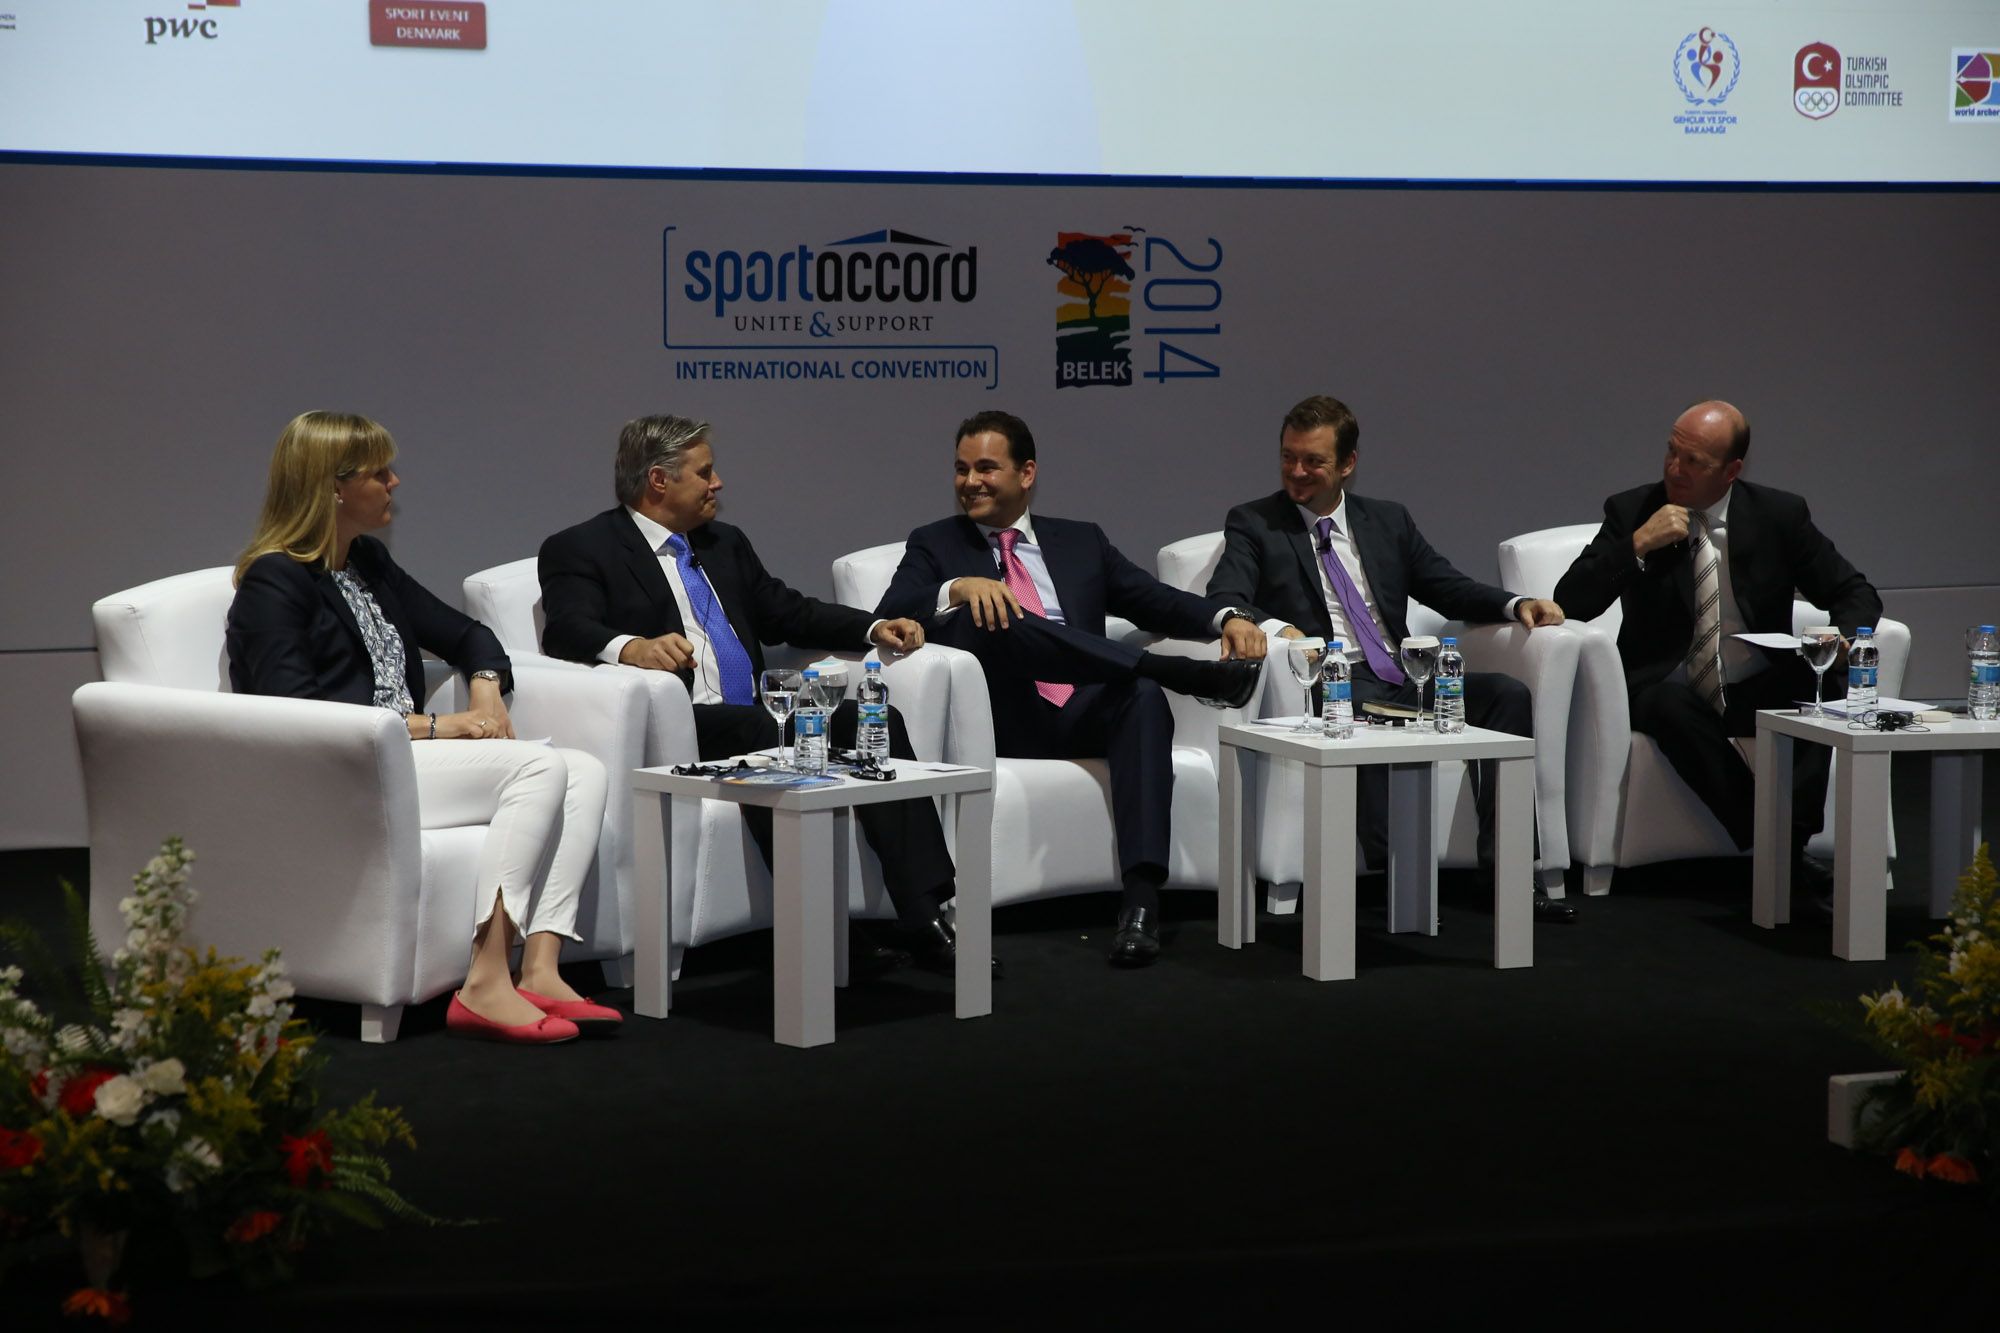 Panellists speak at the 2014 SportAccord Convention in Belek ©SAC